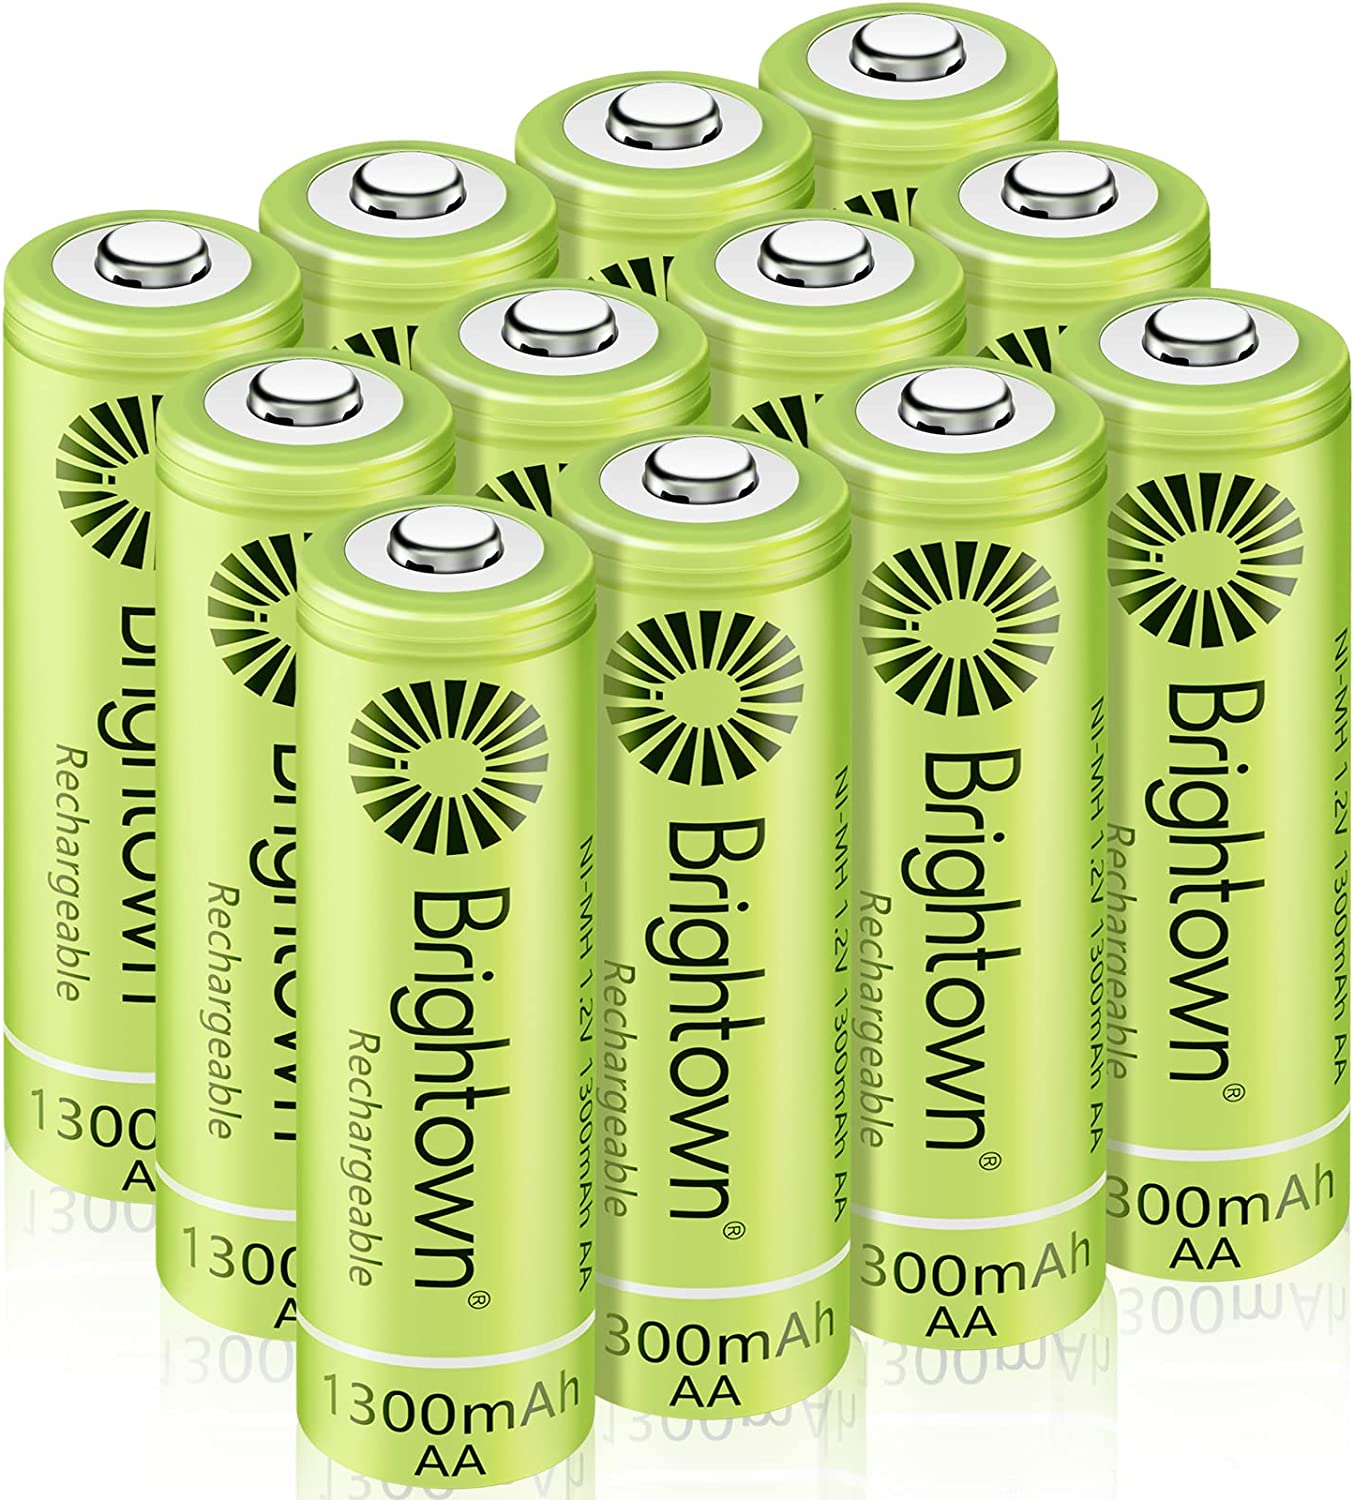 Brightown Solar & Standard Charging Rechargeable AA Batteries, 12-Pack